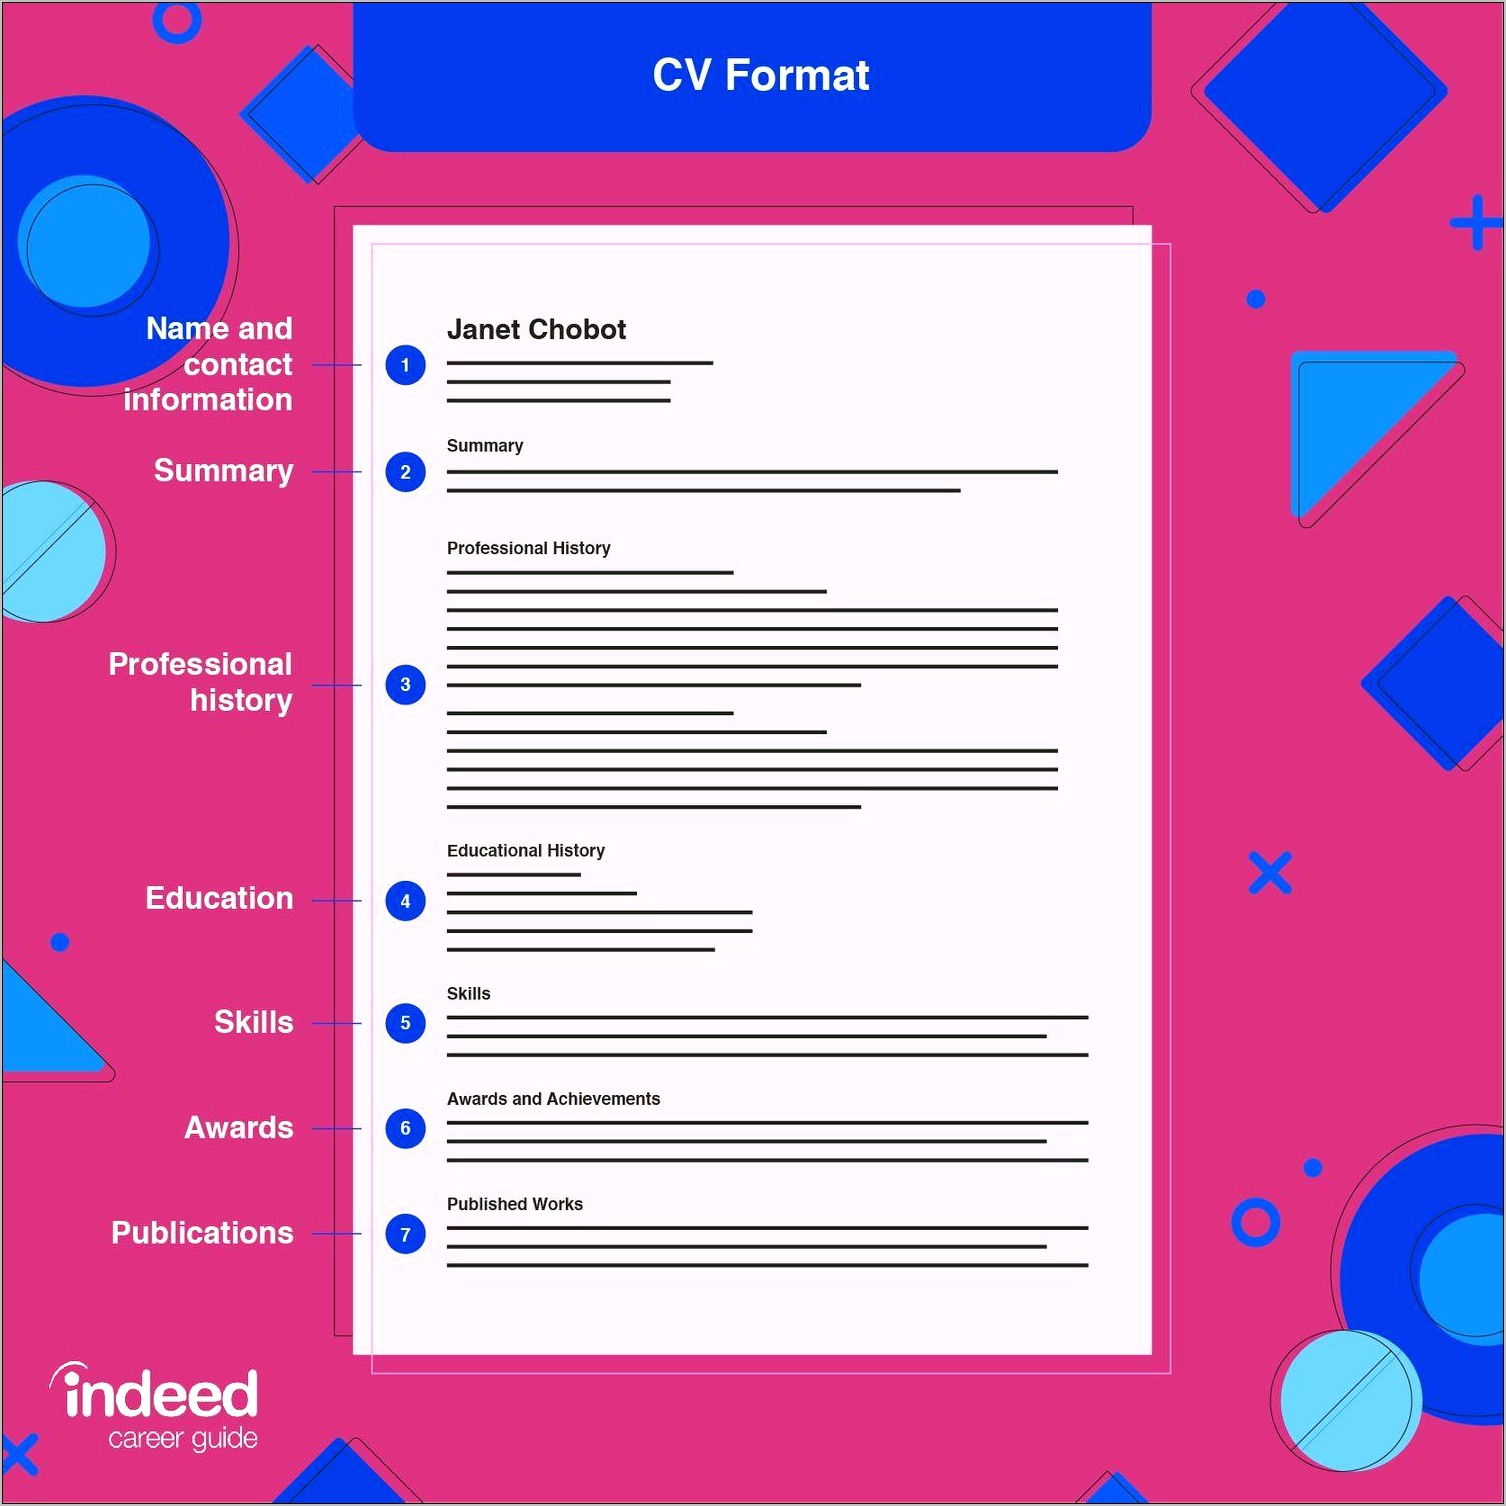 Are Indeed Resume Formats Good To Use